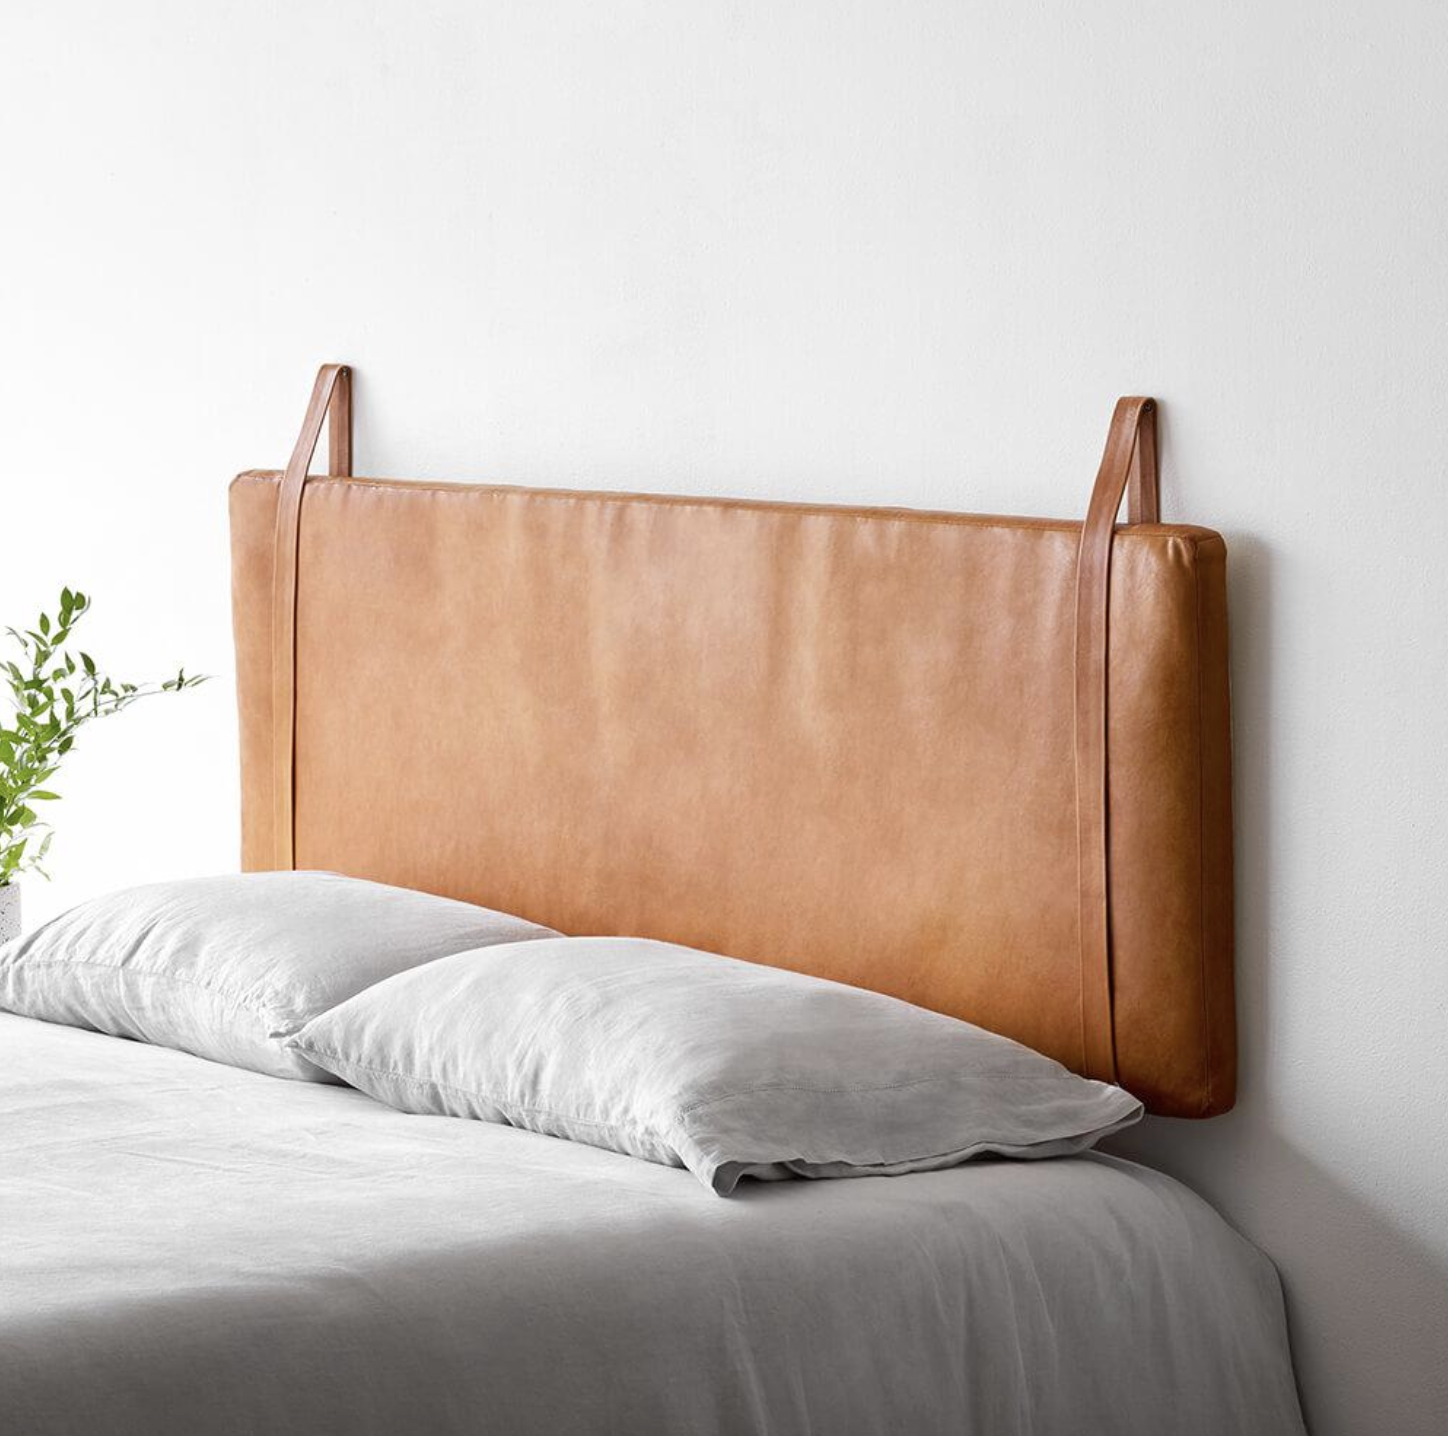 9 Wall Mounted Floating Headboards We, Best Way To Attach Headboard Wall